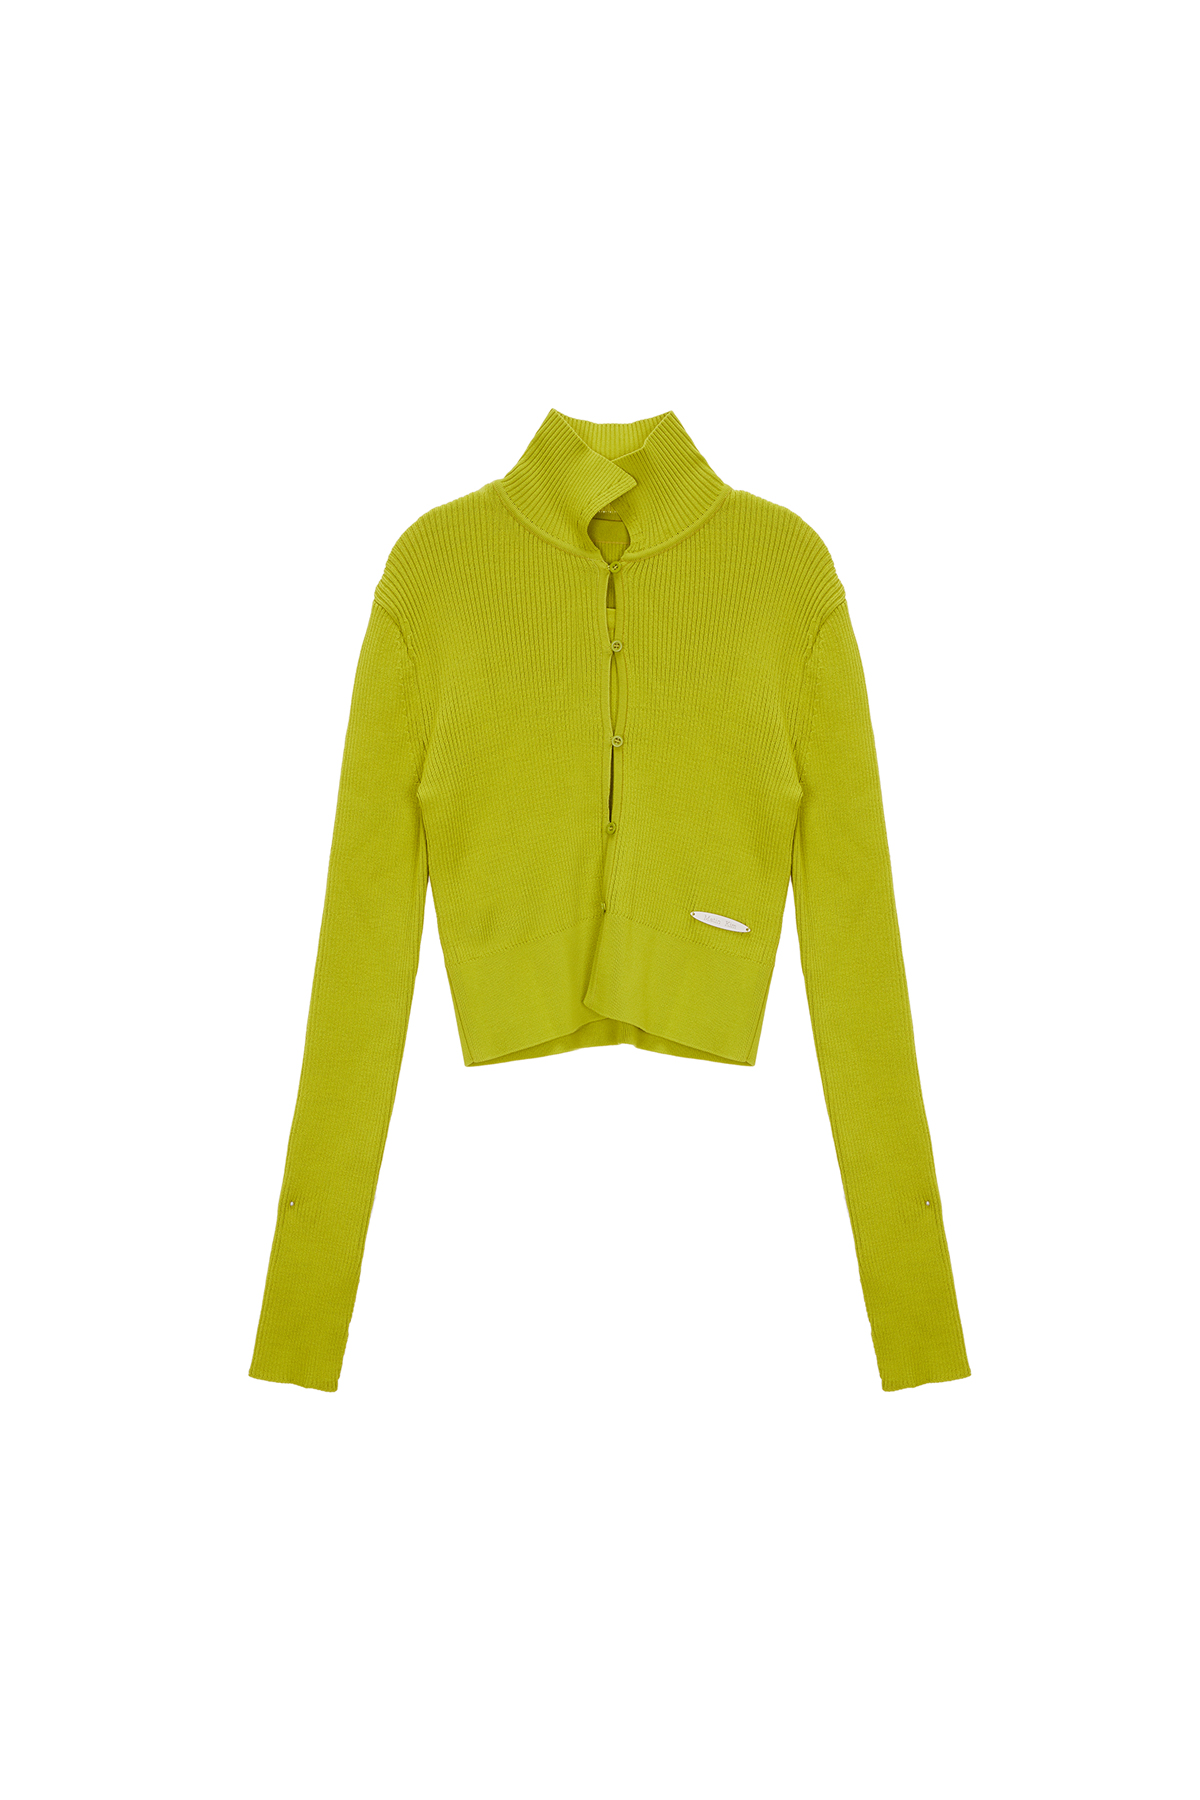 AIRY BUTTON COLLAR CARDIGAN IN LIME